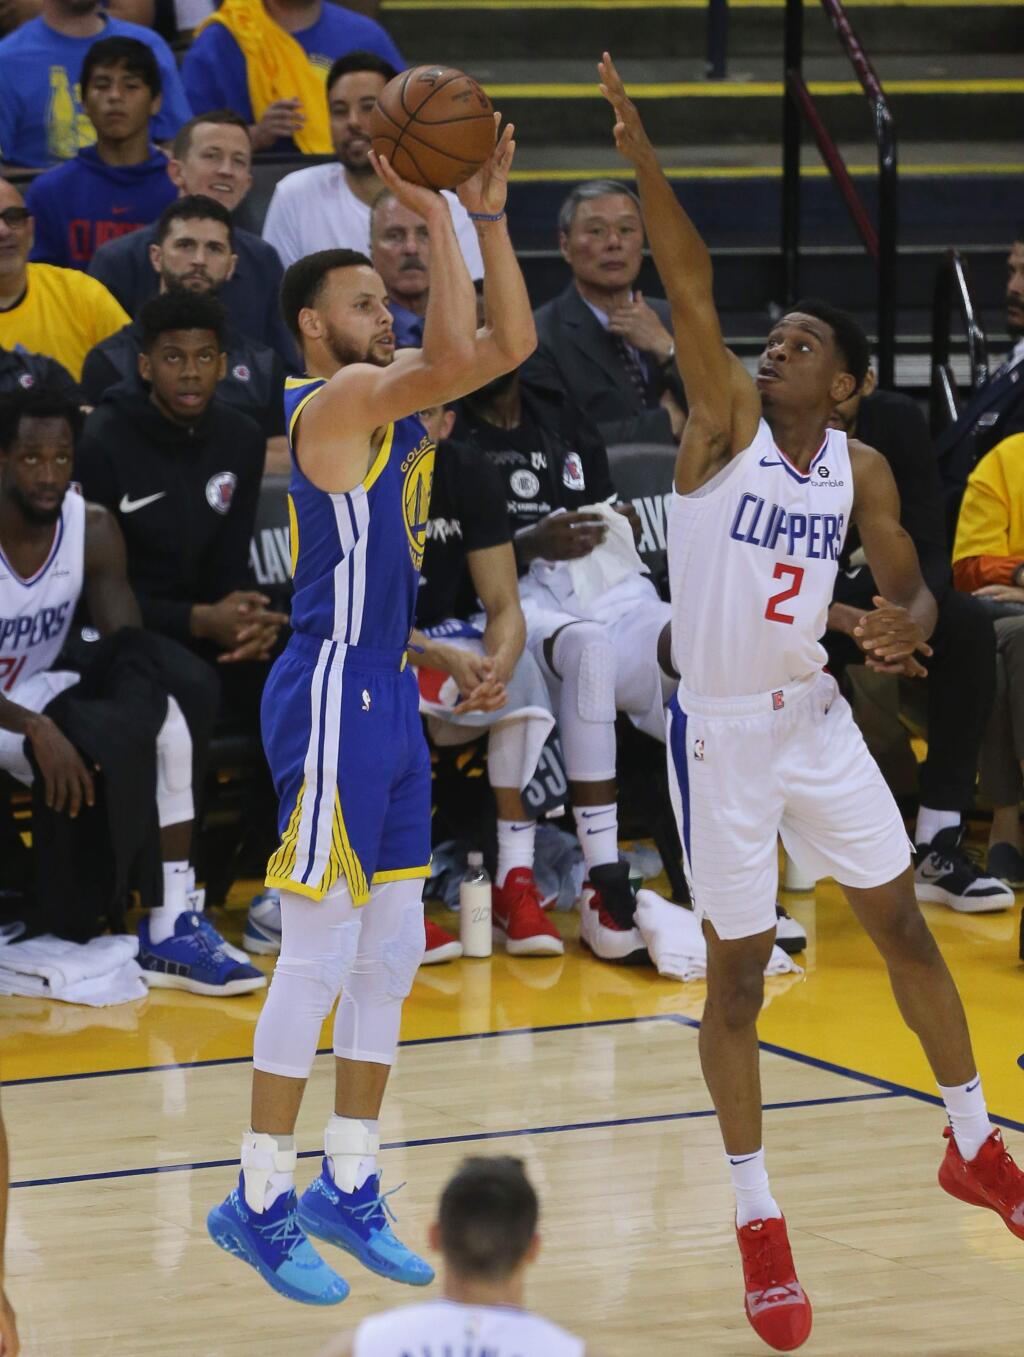 Golden State Warriors guard Stephen Curry hits a short jumper over Los Angeles Clippers guard Shai Gilgeous-Alexander during Game 5 in Oakland on Wednesday, April 24, 2019. (Christopher Chung/ The Press Democrat)